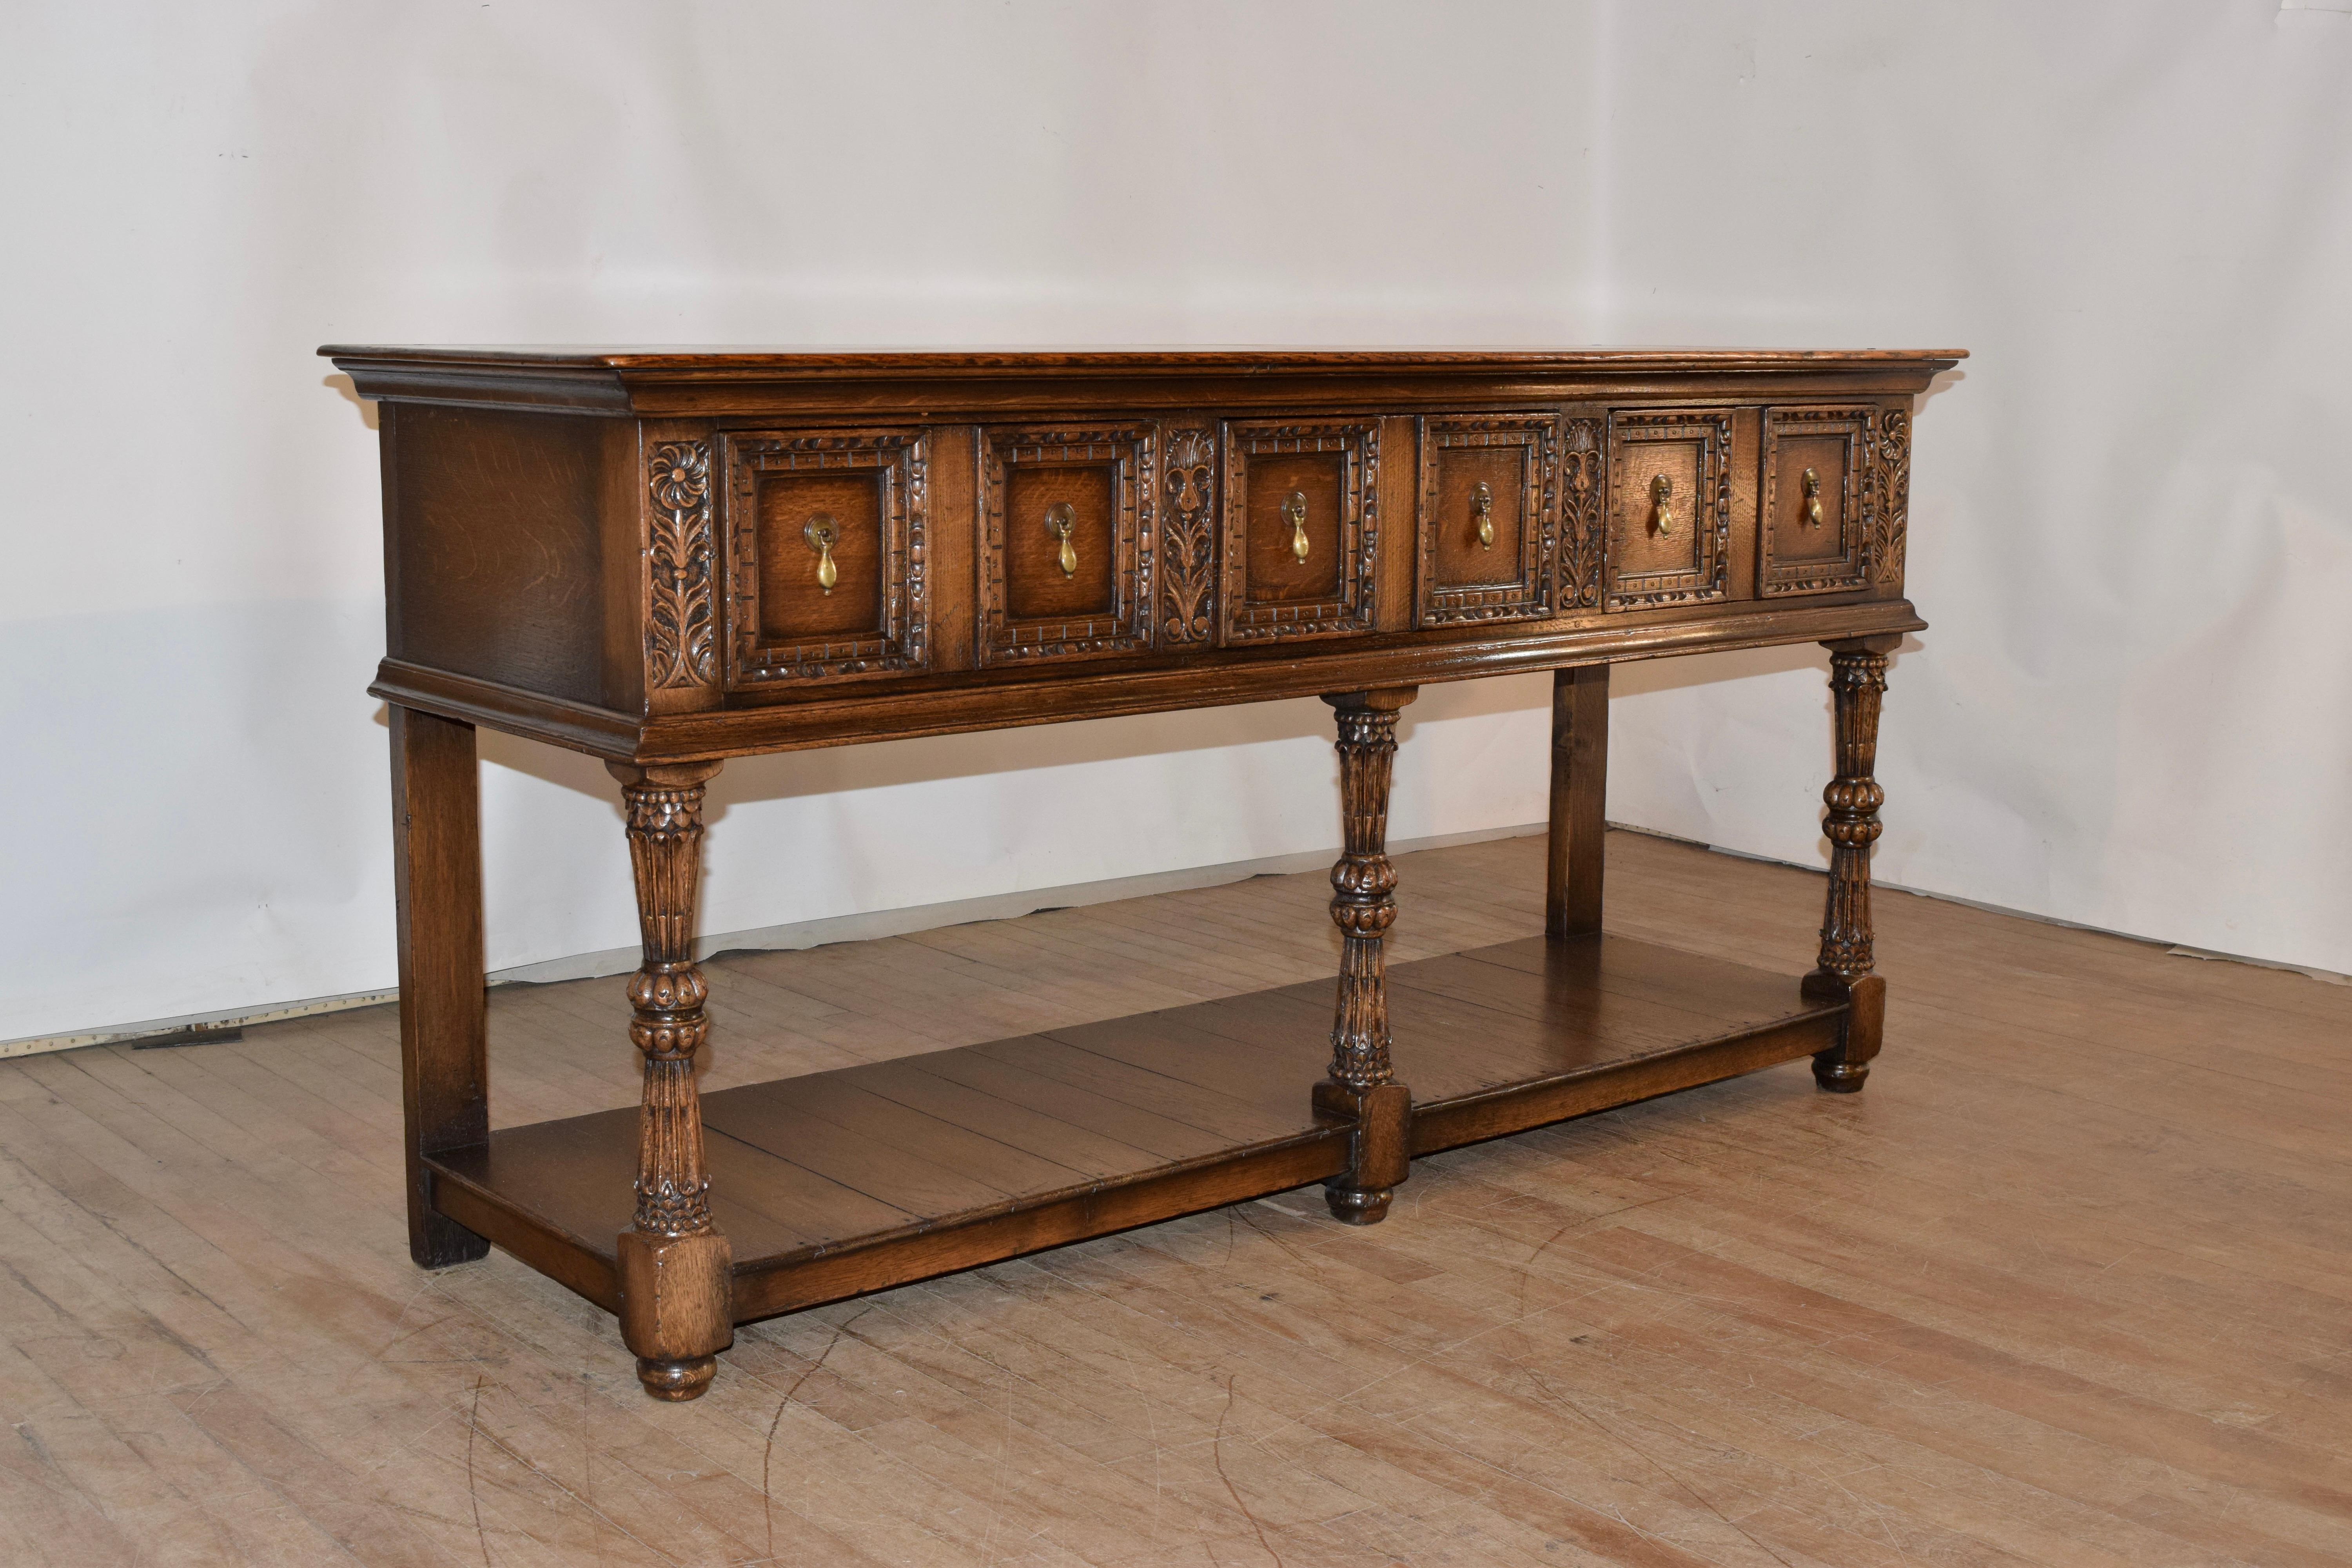 Pair of 19th century English oak sideboards with  plank tops following down to simple sides and three-paneled and carved drawers in the front, flanked by floral carved panels over a molded edge. The pieces are supported on three wonderfully carved